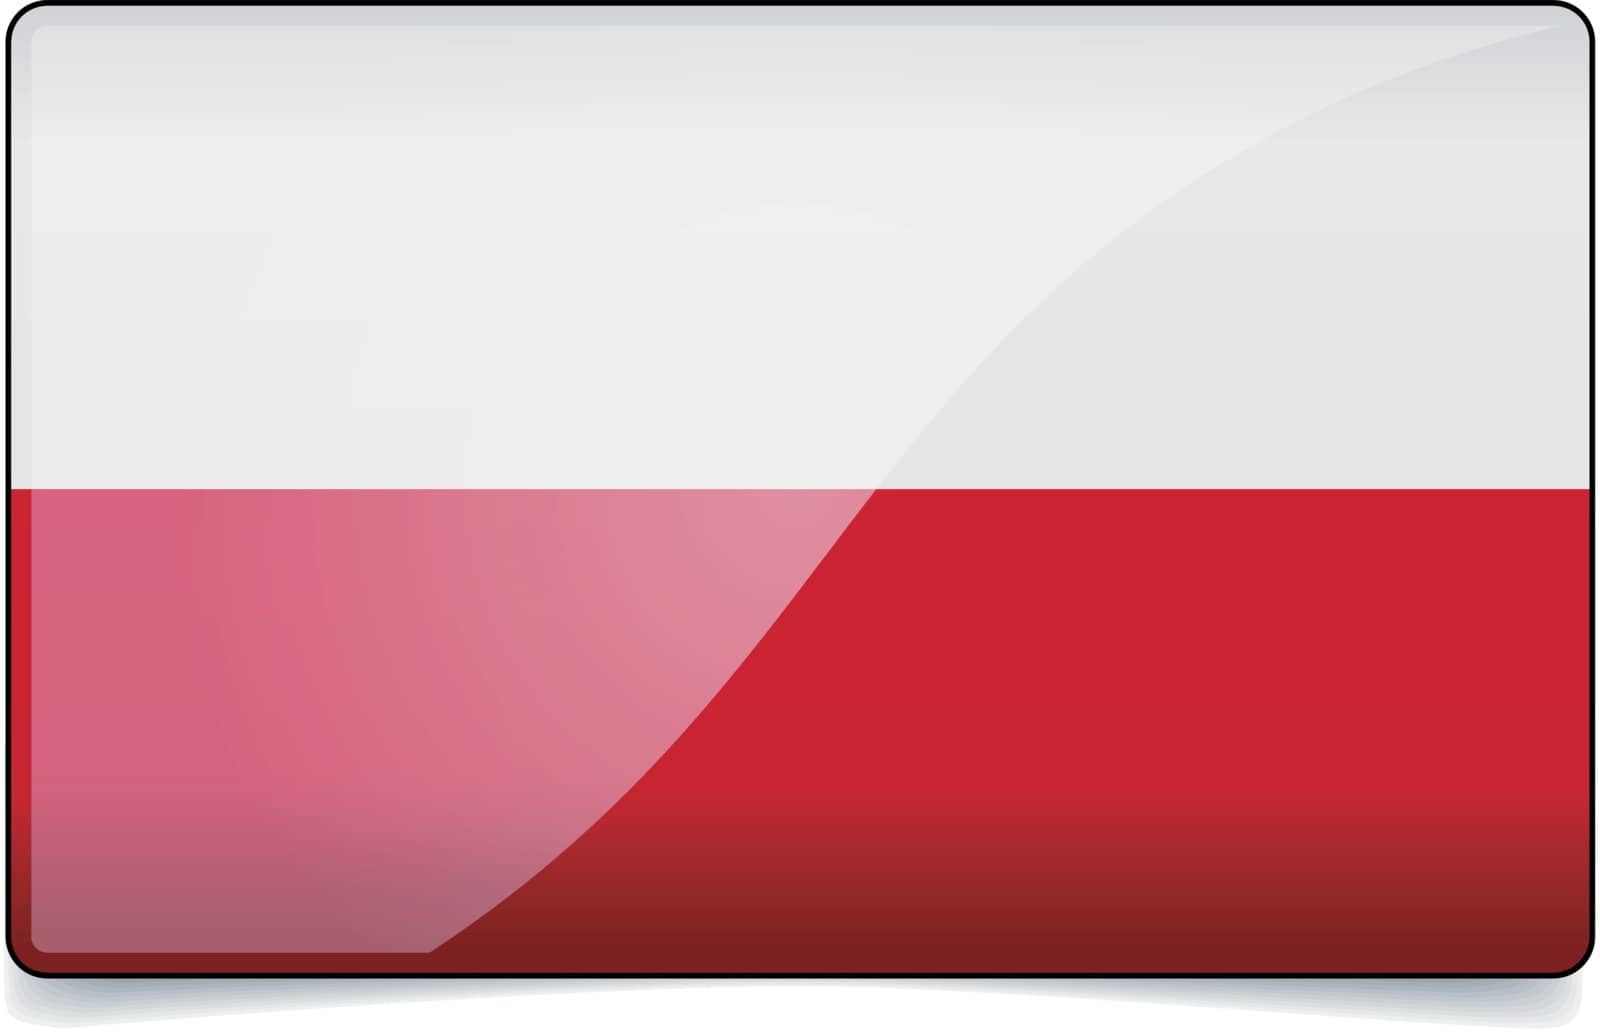 Poland flag button with reflection and shadow. Isolated glossy f by akaprinay